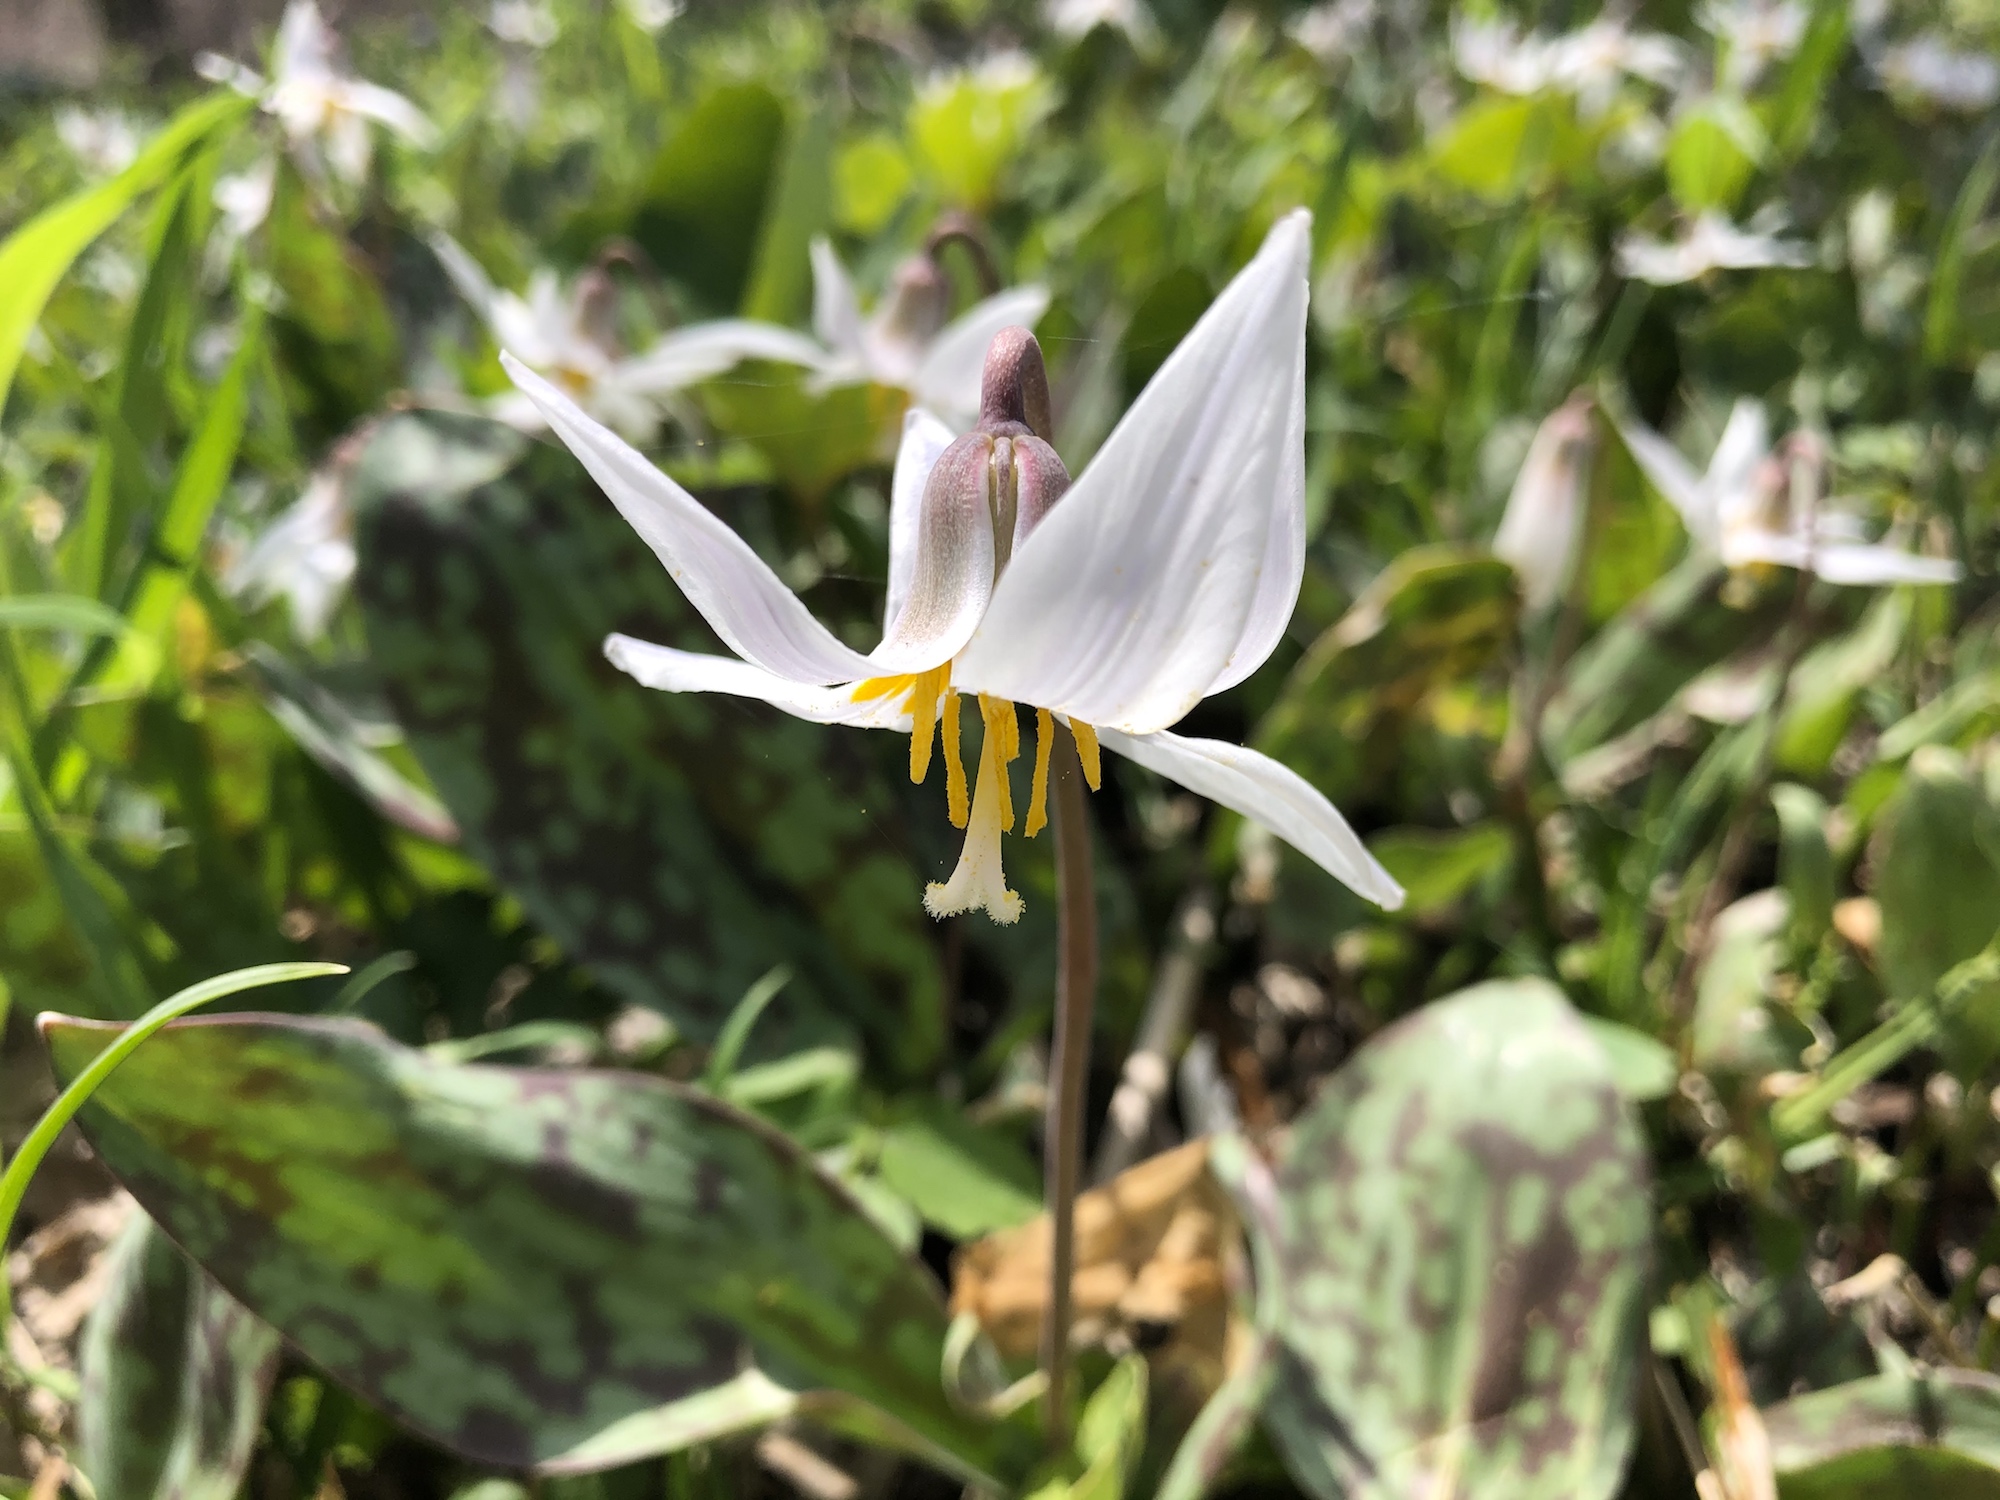 Trout Lily in Oak Savanna by Council Ring in Madison, Wisconsin on May 1, 2020.